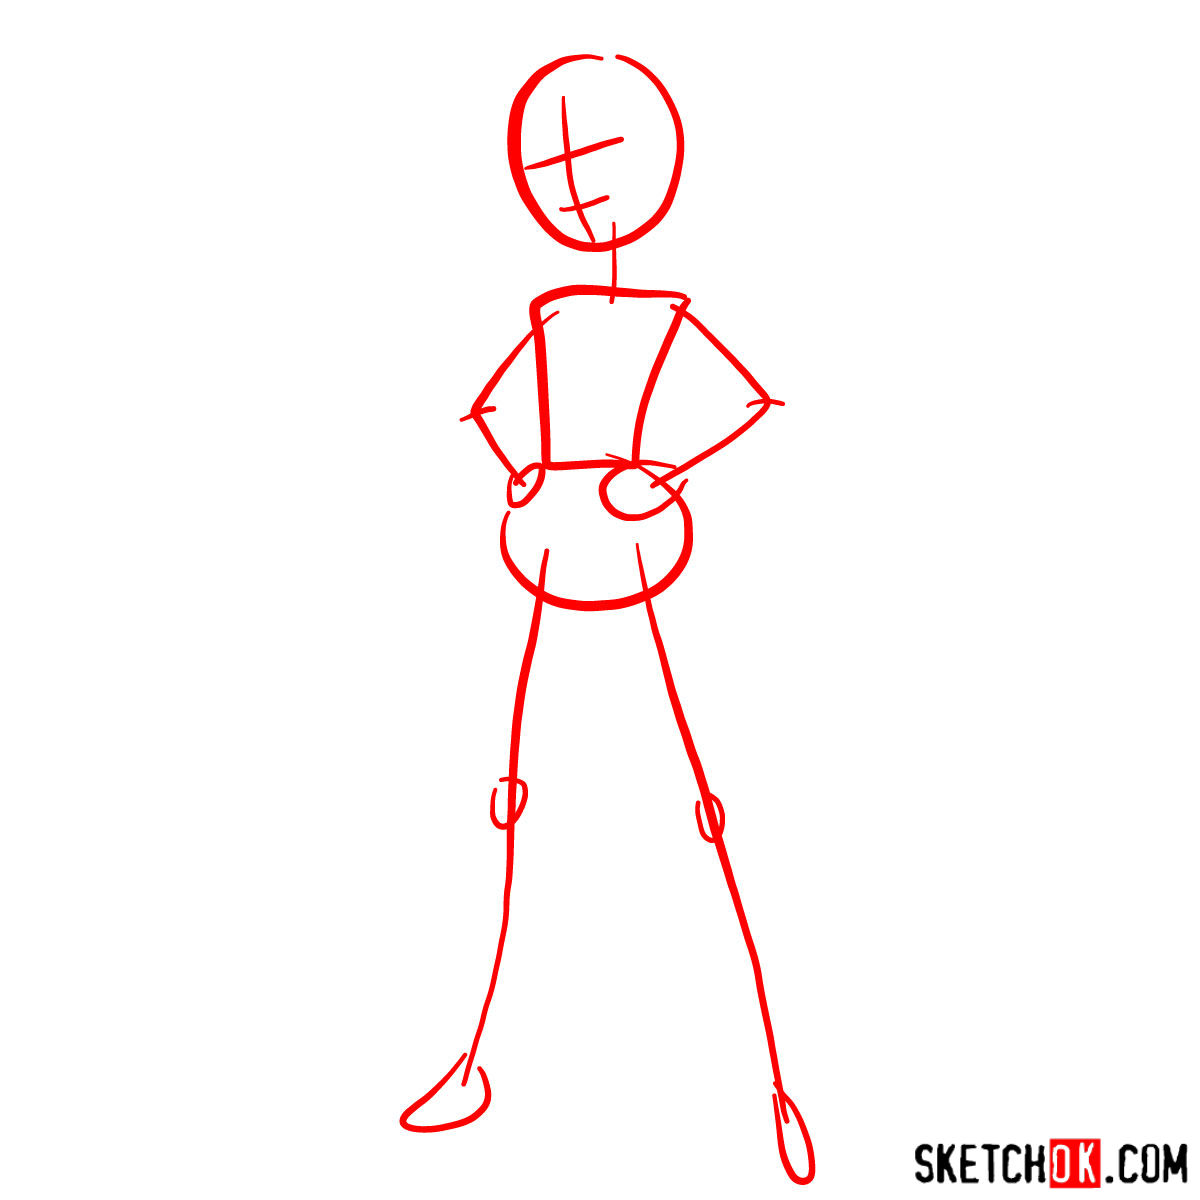 How to draw Elastigirl from The Incredibles - step 01